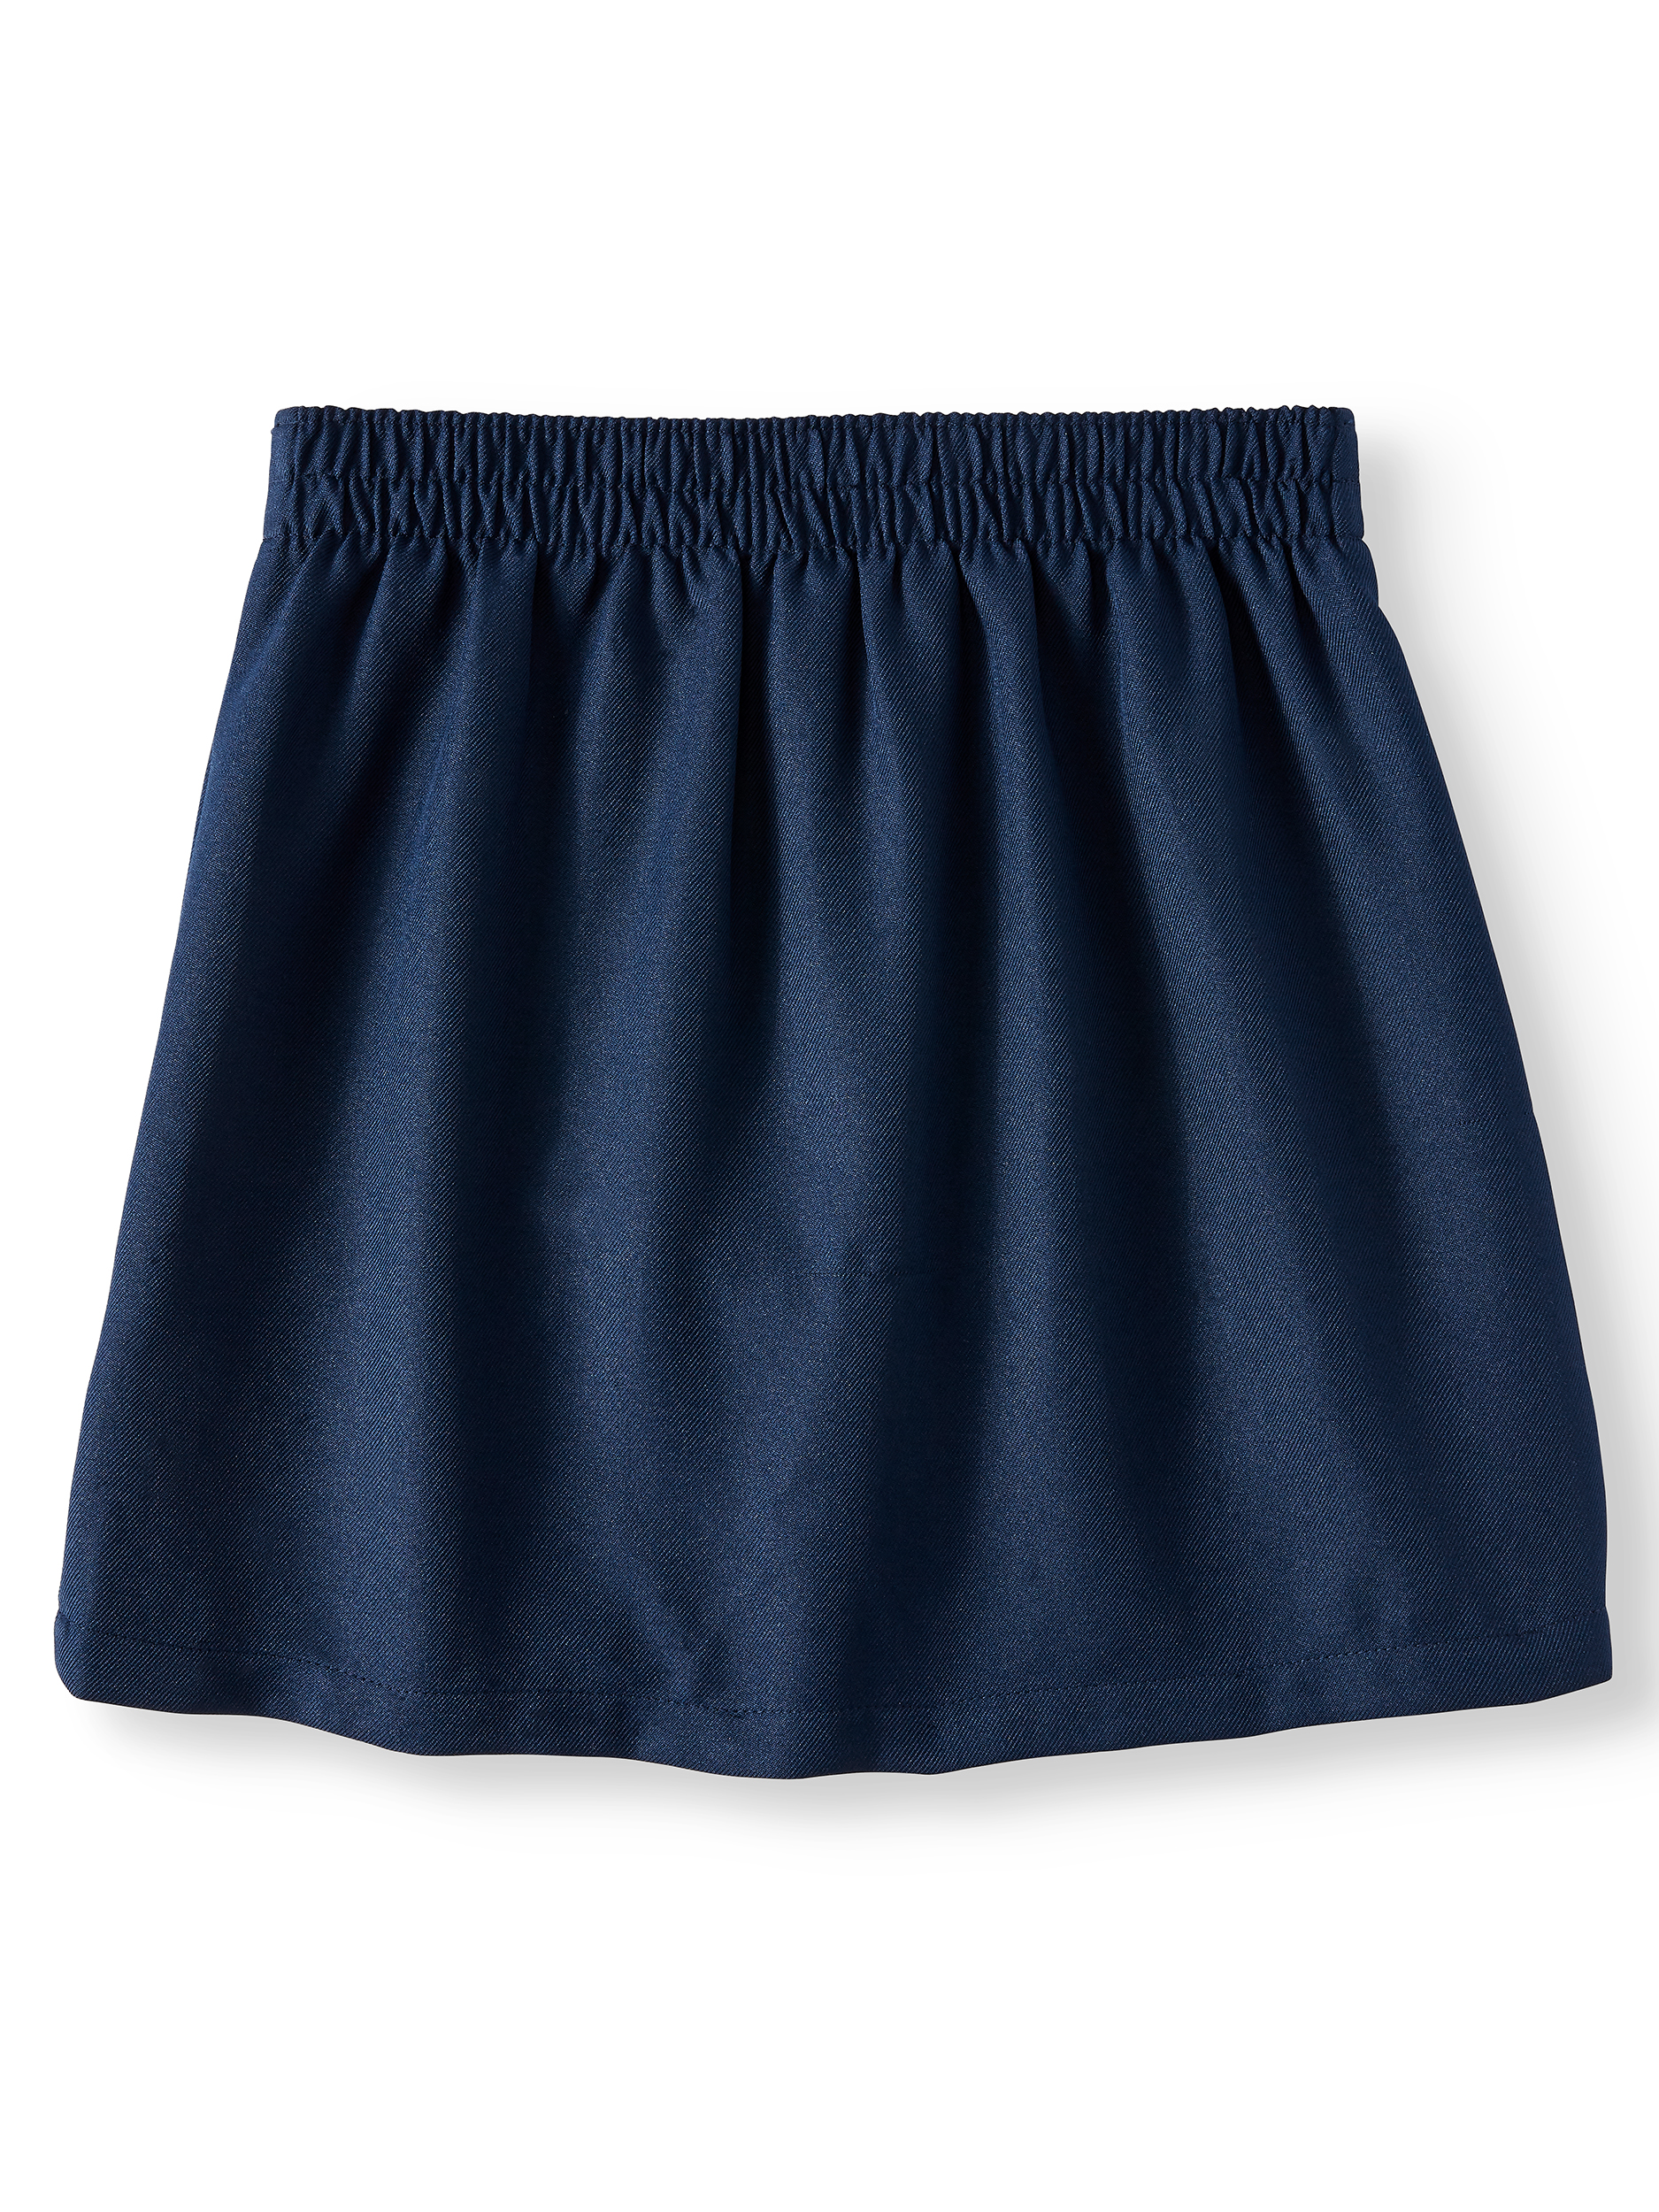 Wonder Nation Girls School Uniform Pleated Belted Scooter Skirt, Sizes 4-16 & Plus - image 2 of 3